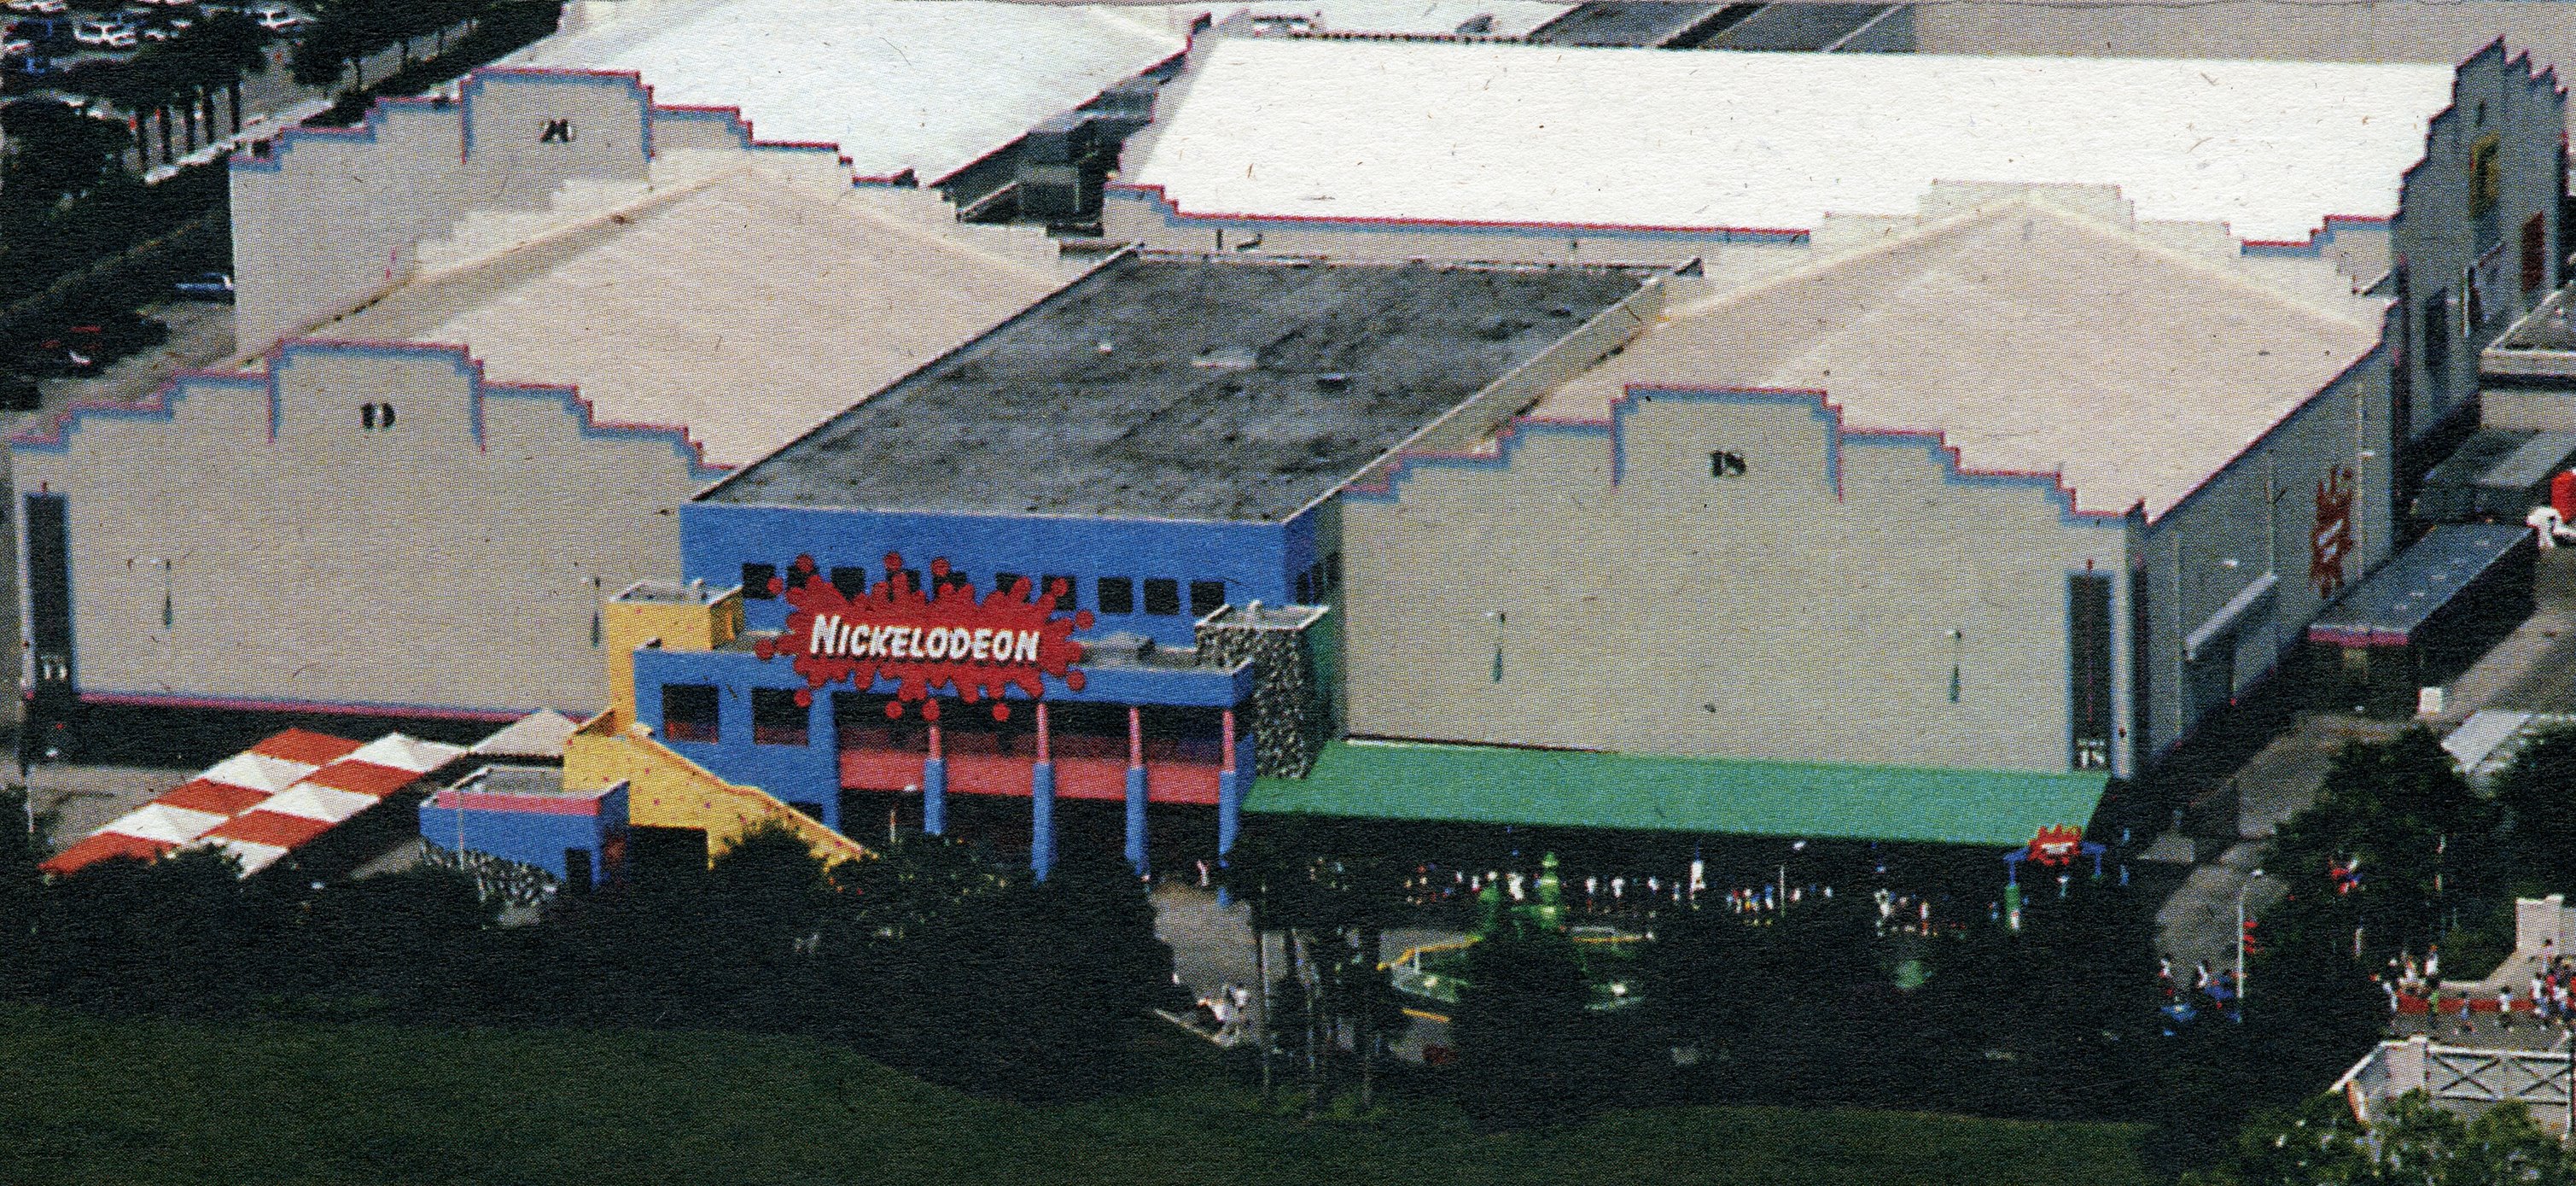 An aerial view of the Nickelodeon complex